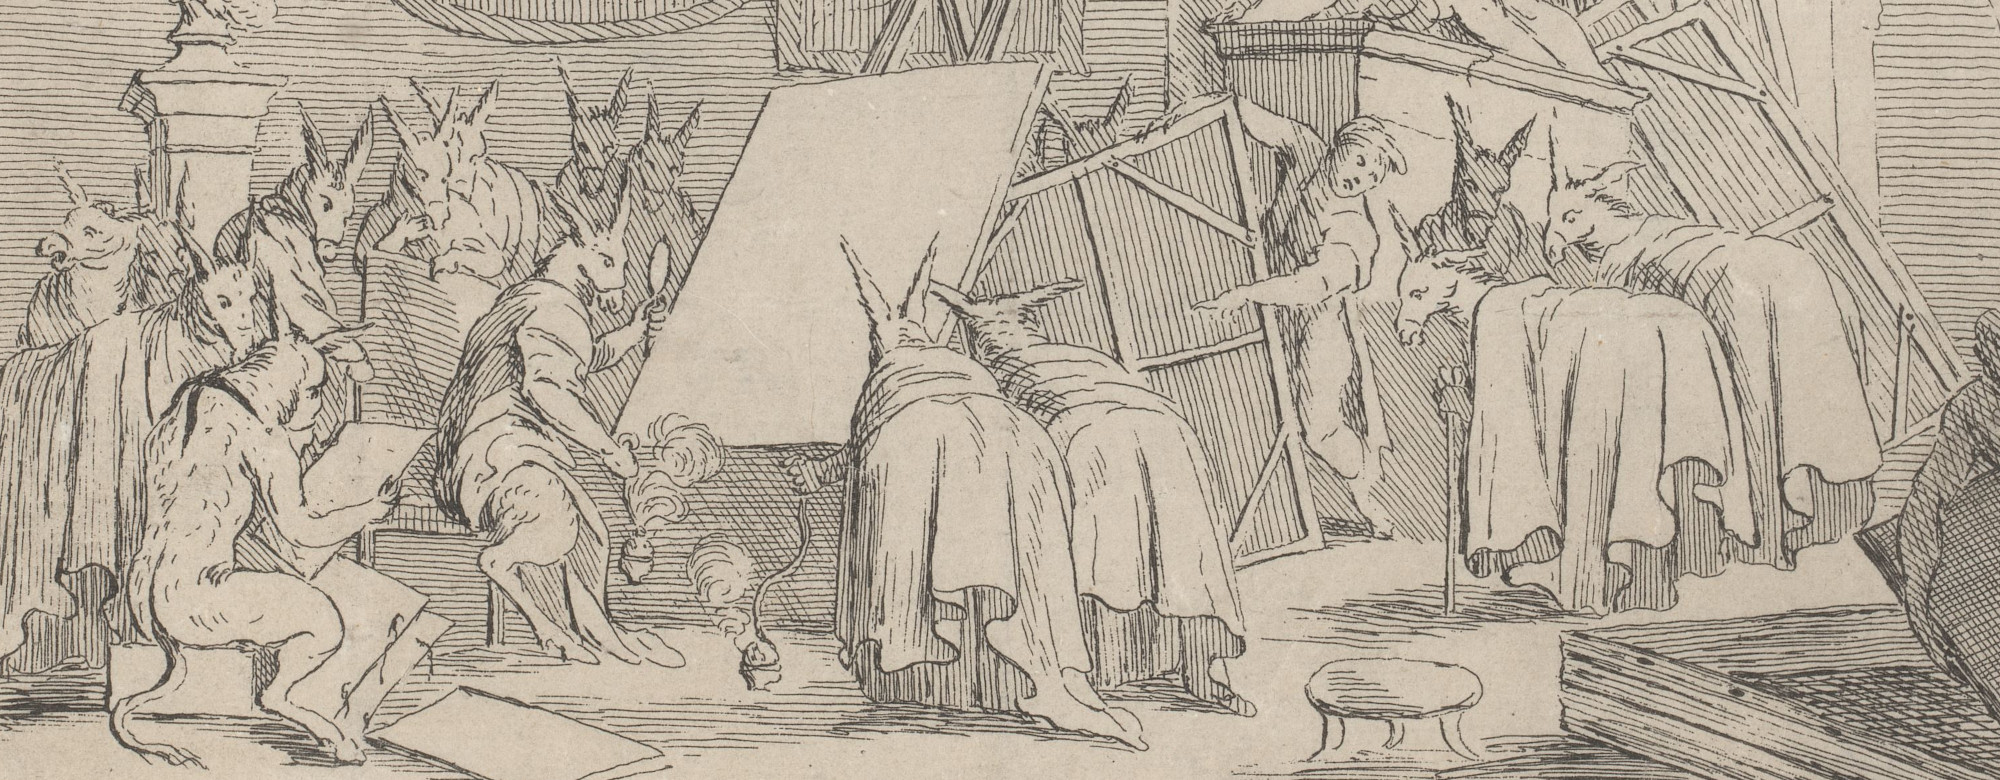 A satire on the art business in which art experts and dealers who assess paintings are depicted as donkeys. After the drawing by Trémolières in the Hessisches Landes Museum in Darmstadt (cropped).